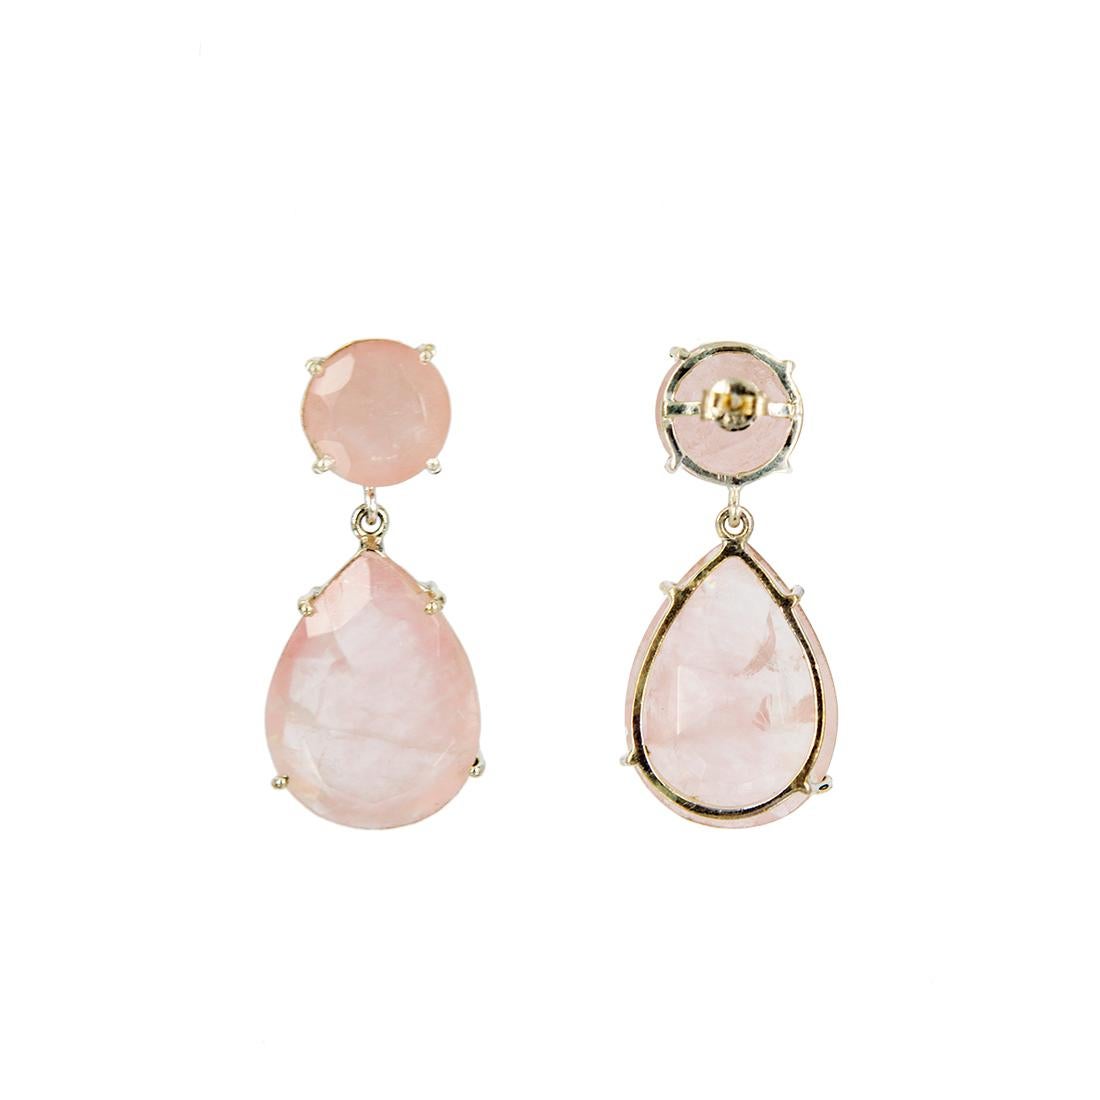 These statement earrings by Youforeva are designed in Australia and handmade by our artisan team in India, utilising traditional techniques. The design showcases the organic beauty of the stone where natural imperfections like inclusions or various